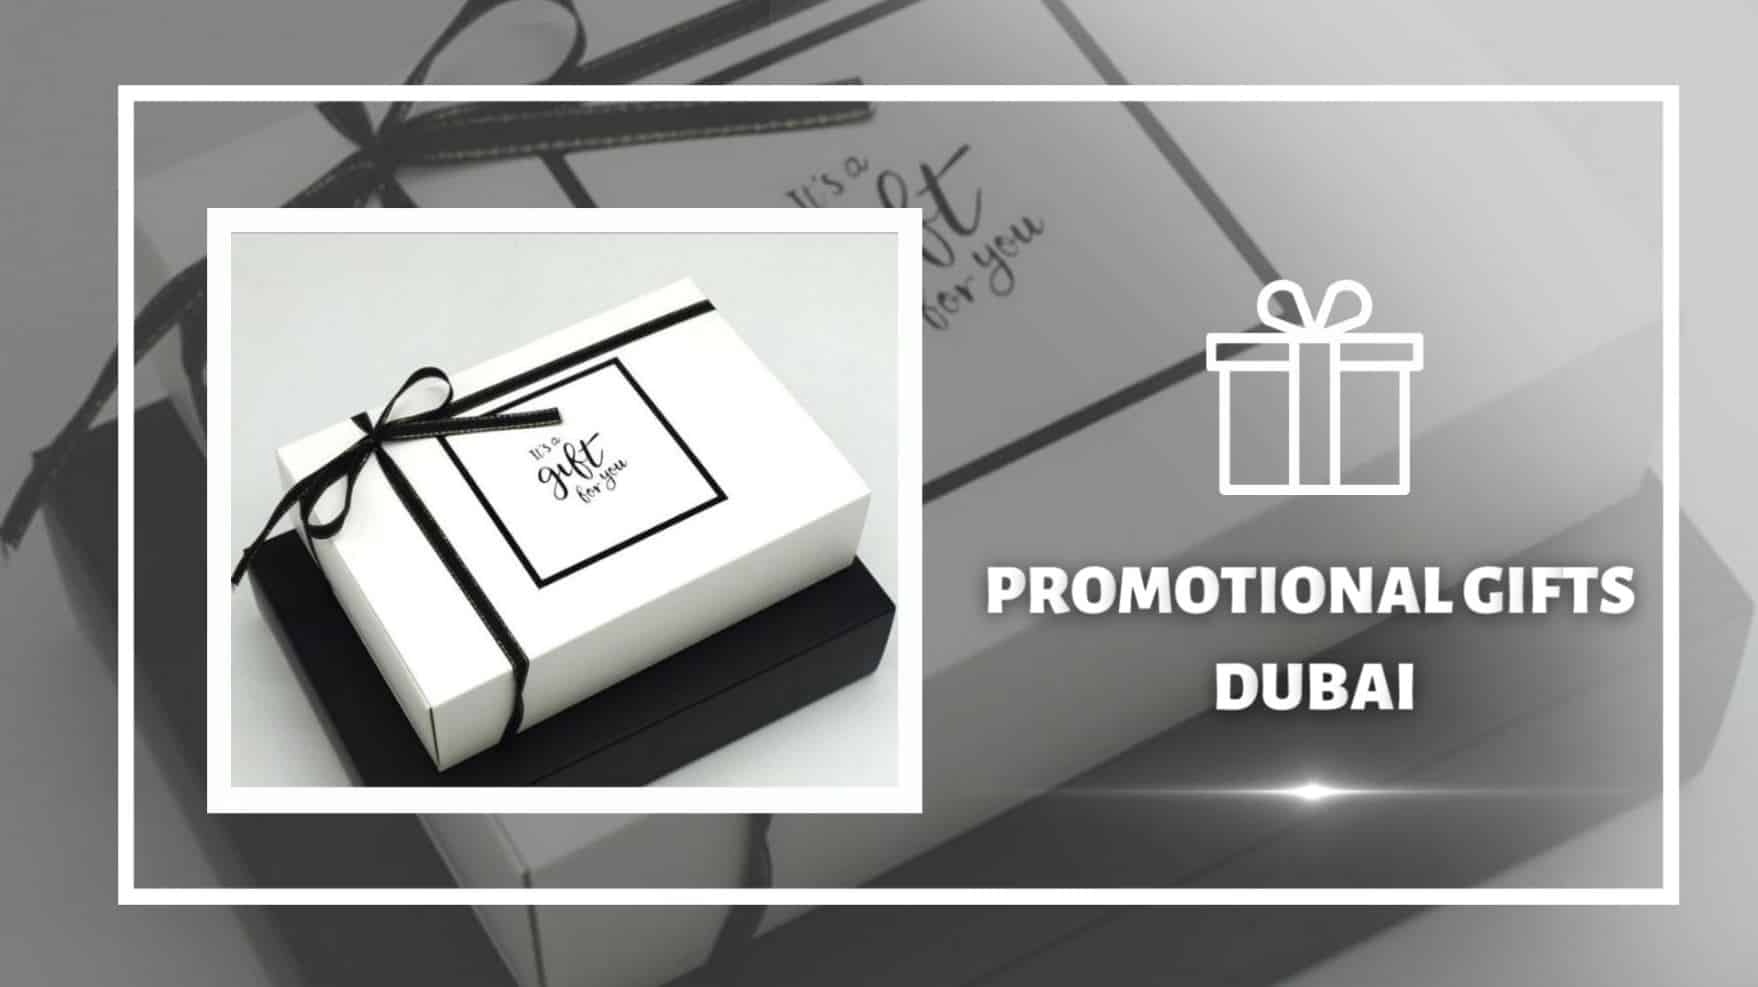 Top 5 Promotional Gifts for Work Anniversaries